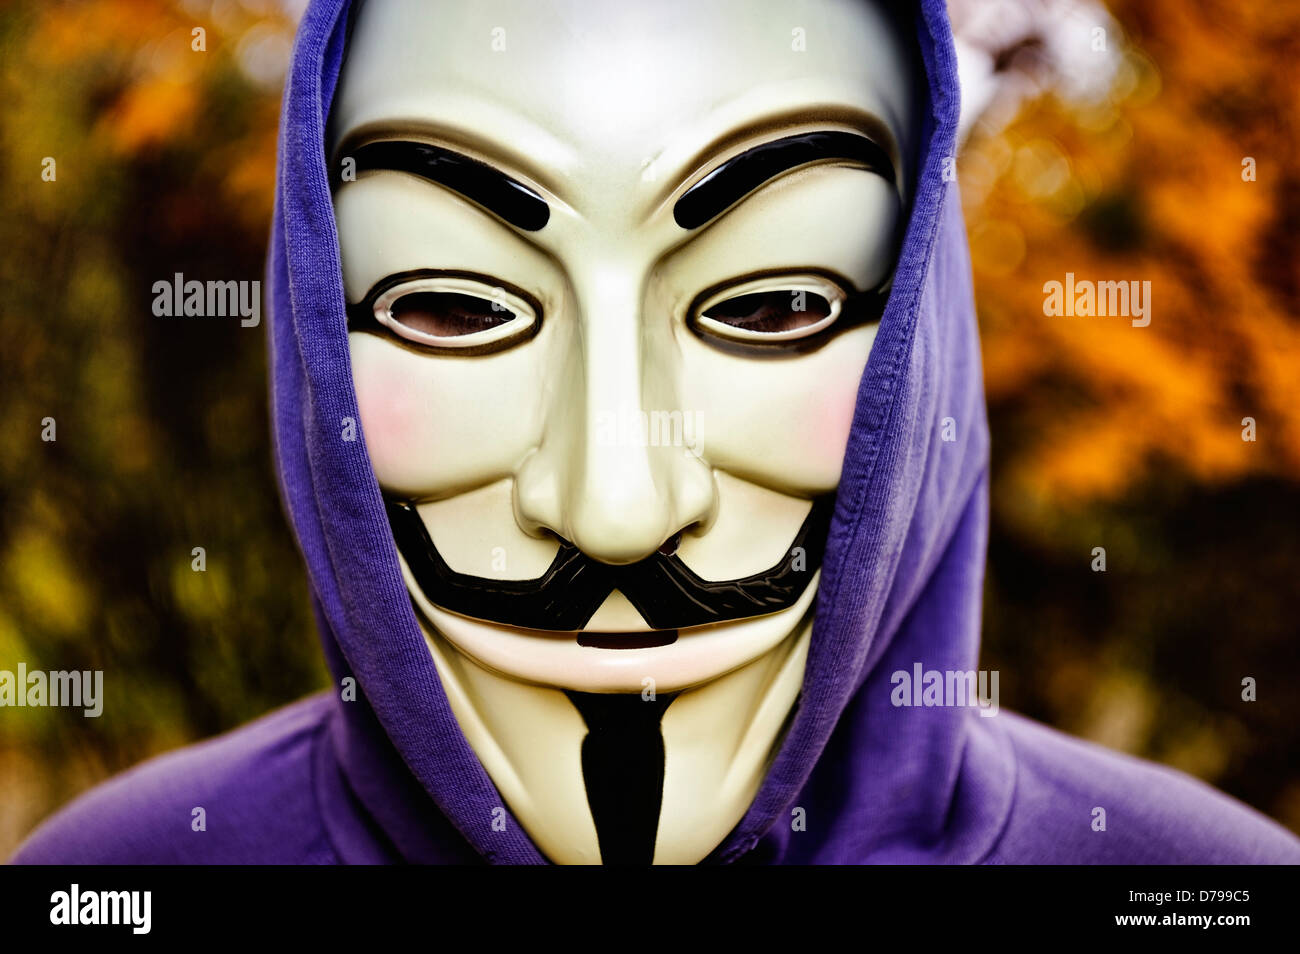 Man with Occupy mask, bank protest , Mann mit Occupy-Maske, Bankenprotest Stock Photo